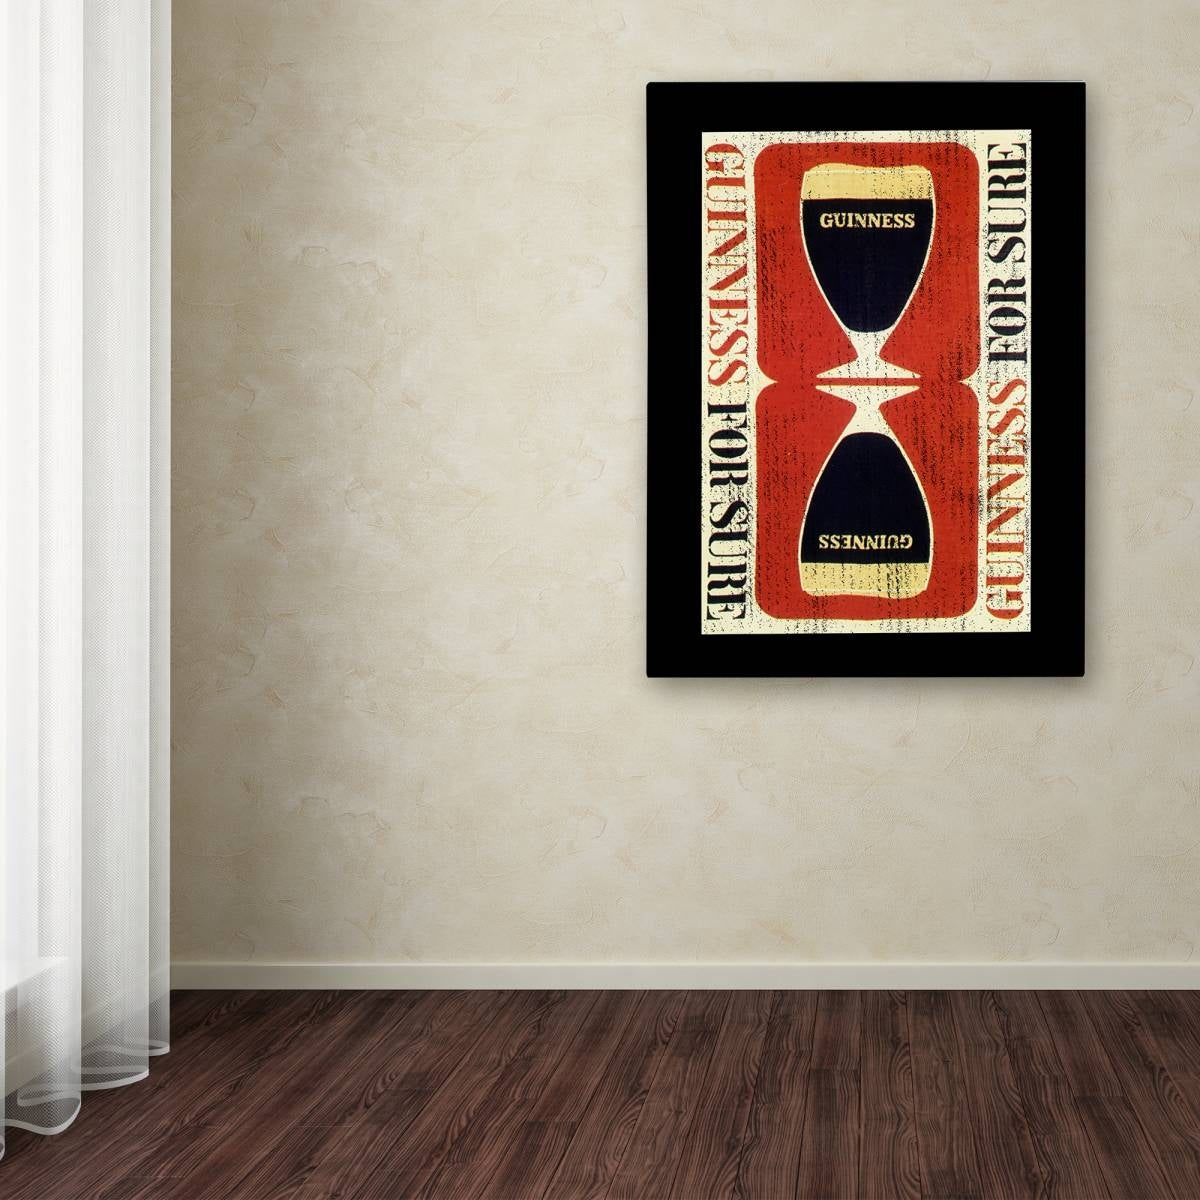 A Guinness Brewery 'Guinness For Sure' canvas art showcasing a minimalist aesthetic of a beer glass, beautifully framed and hung on the wall.